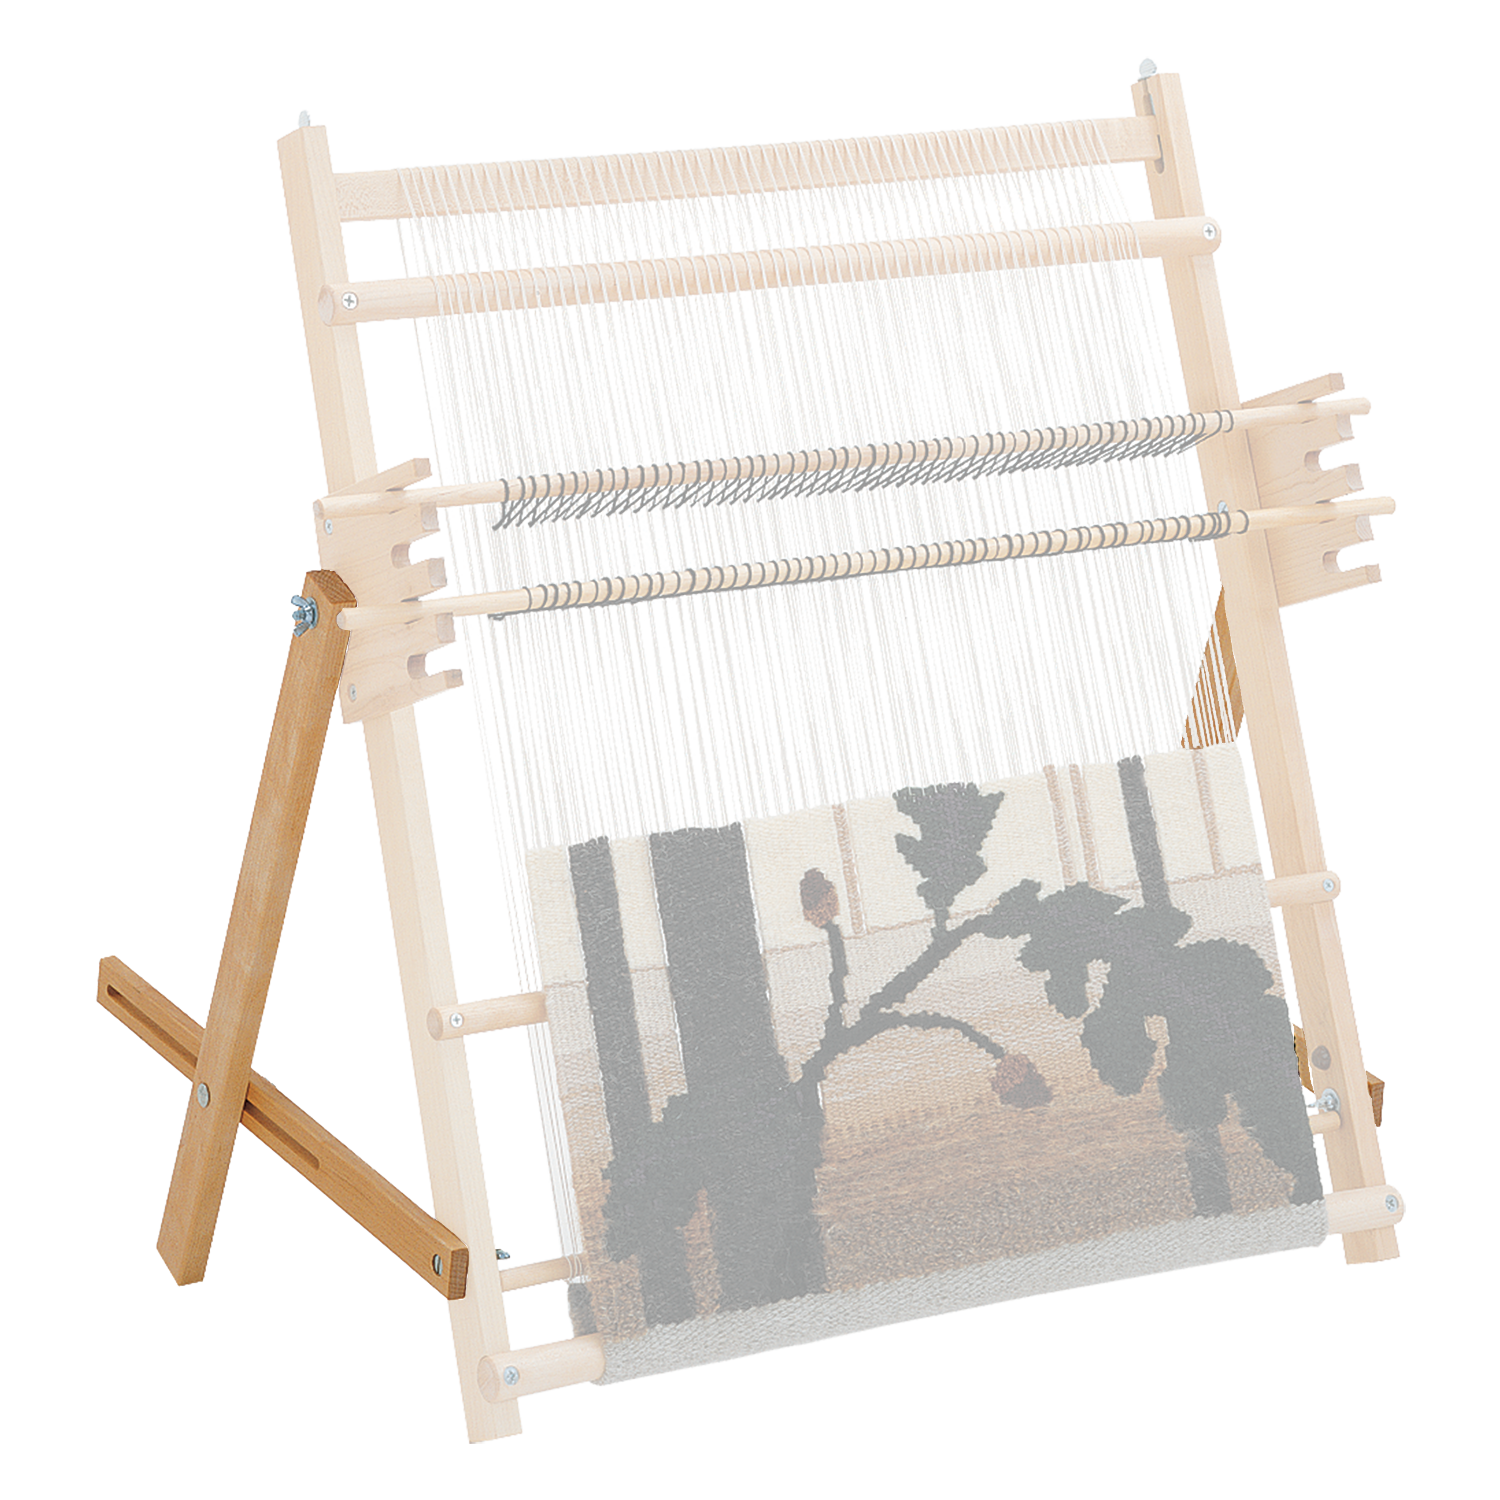 Friendly Loom: Tapestry Weaving Stand